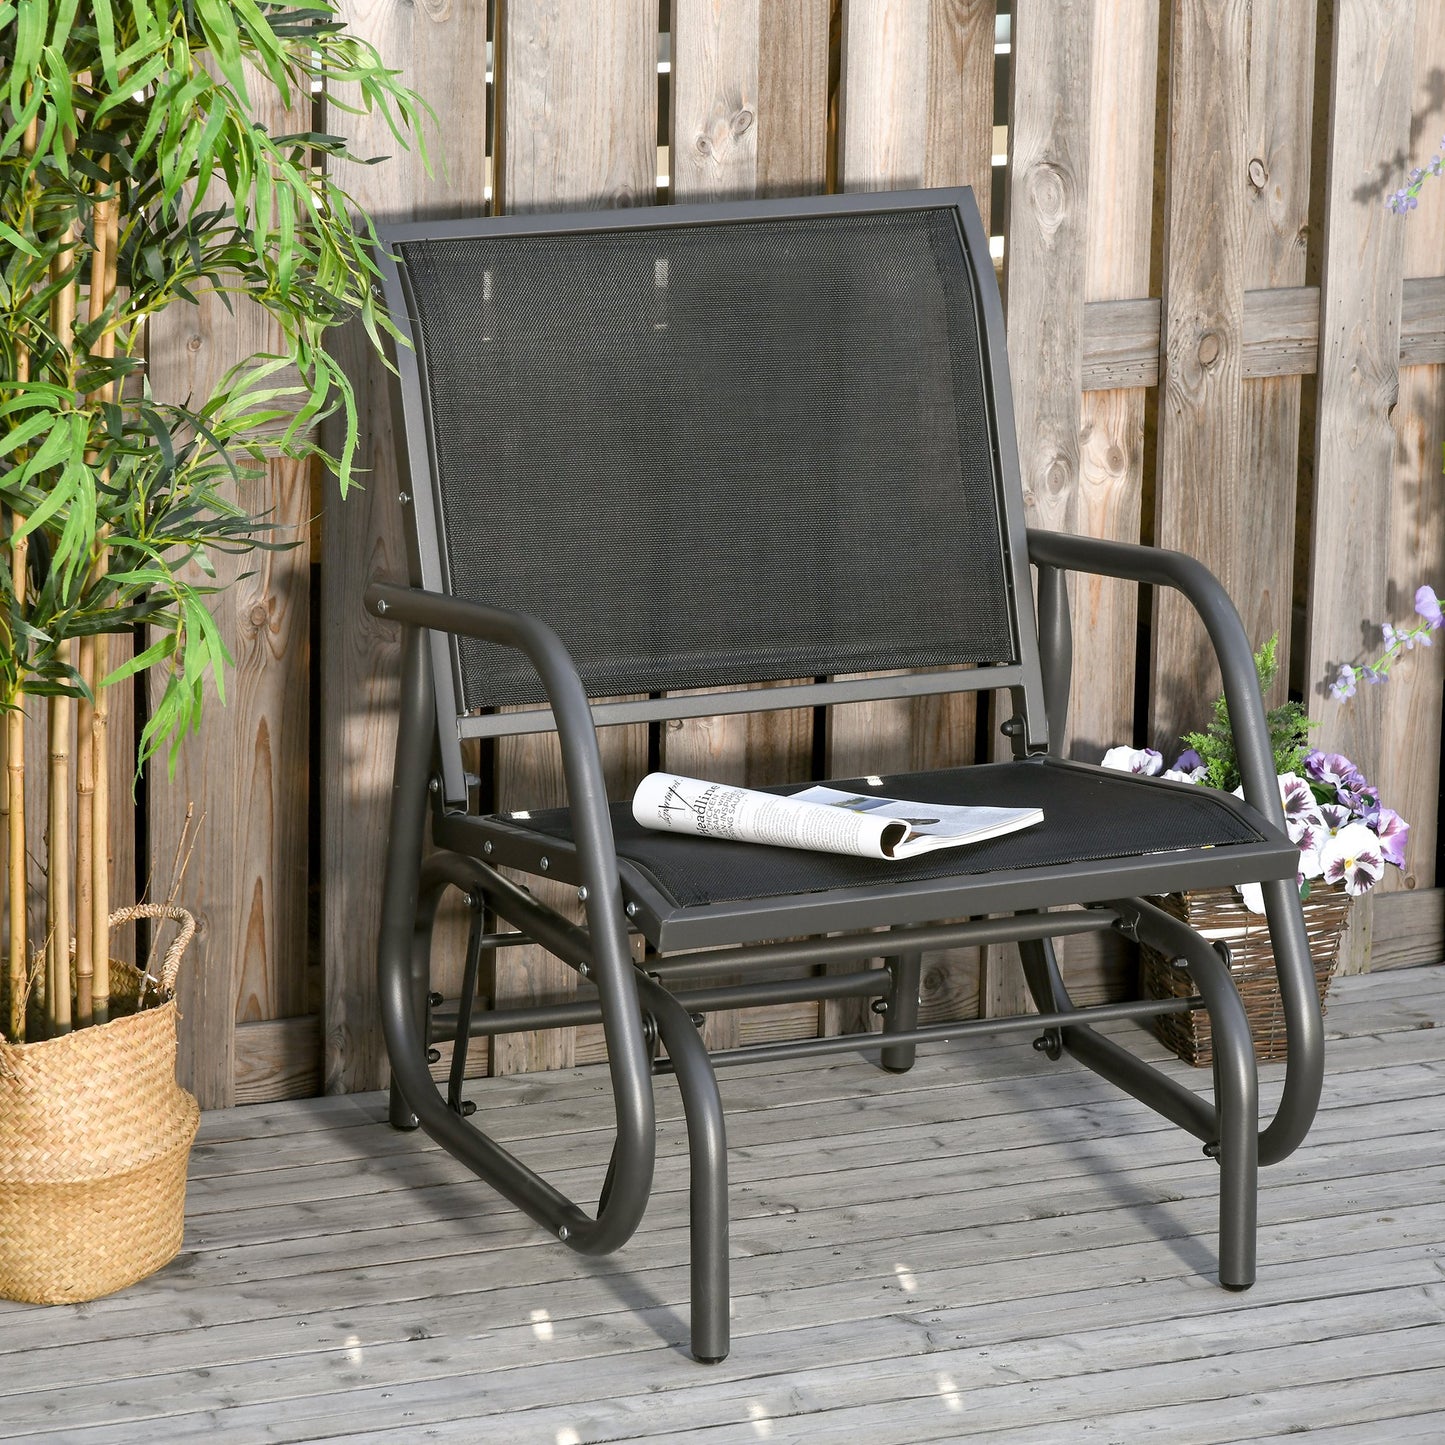 Outsunny Outside Glider Swinging Lounge Chair w/ Weather & UV Resistance Grey Black